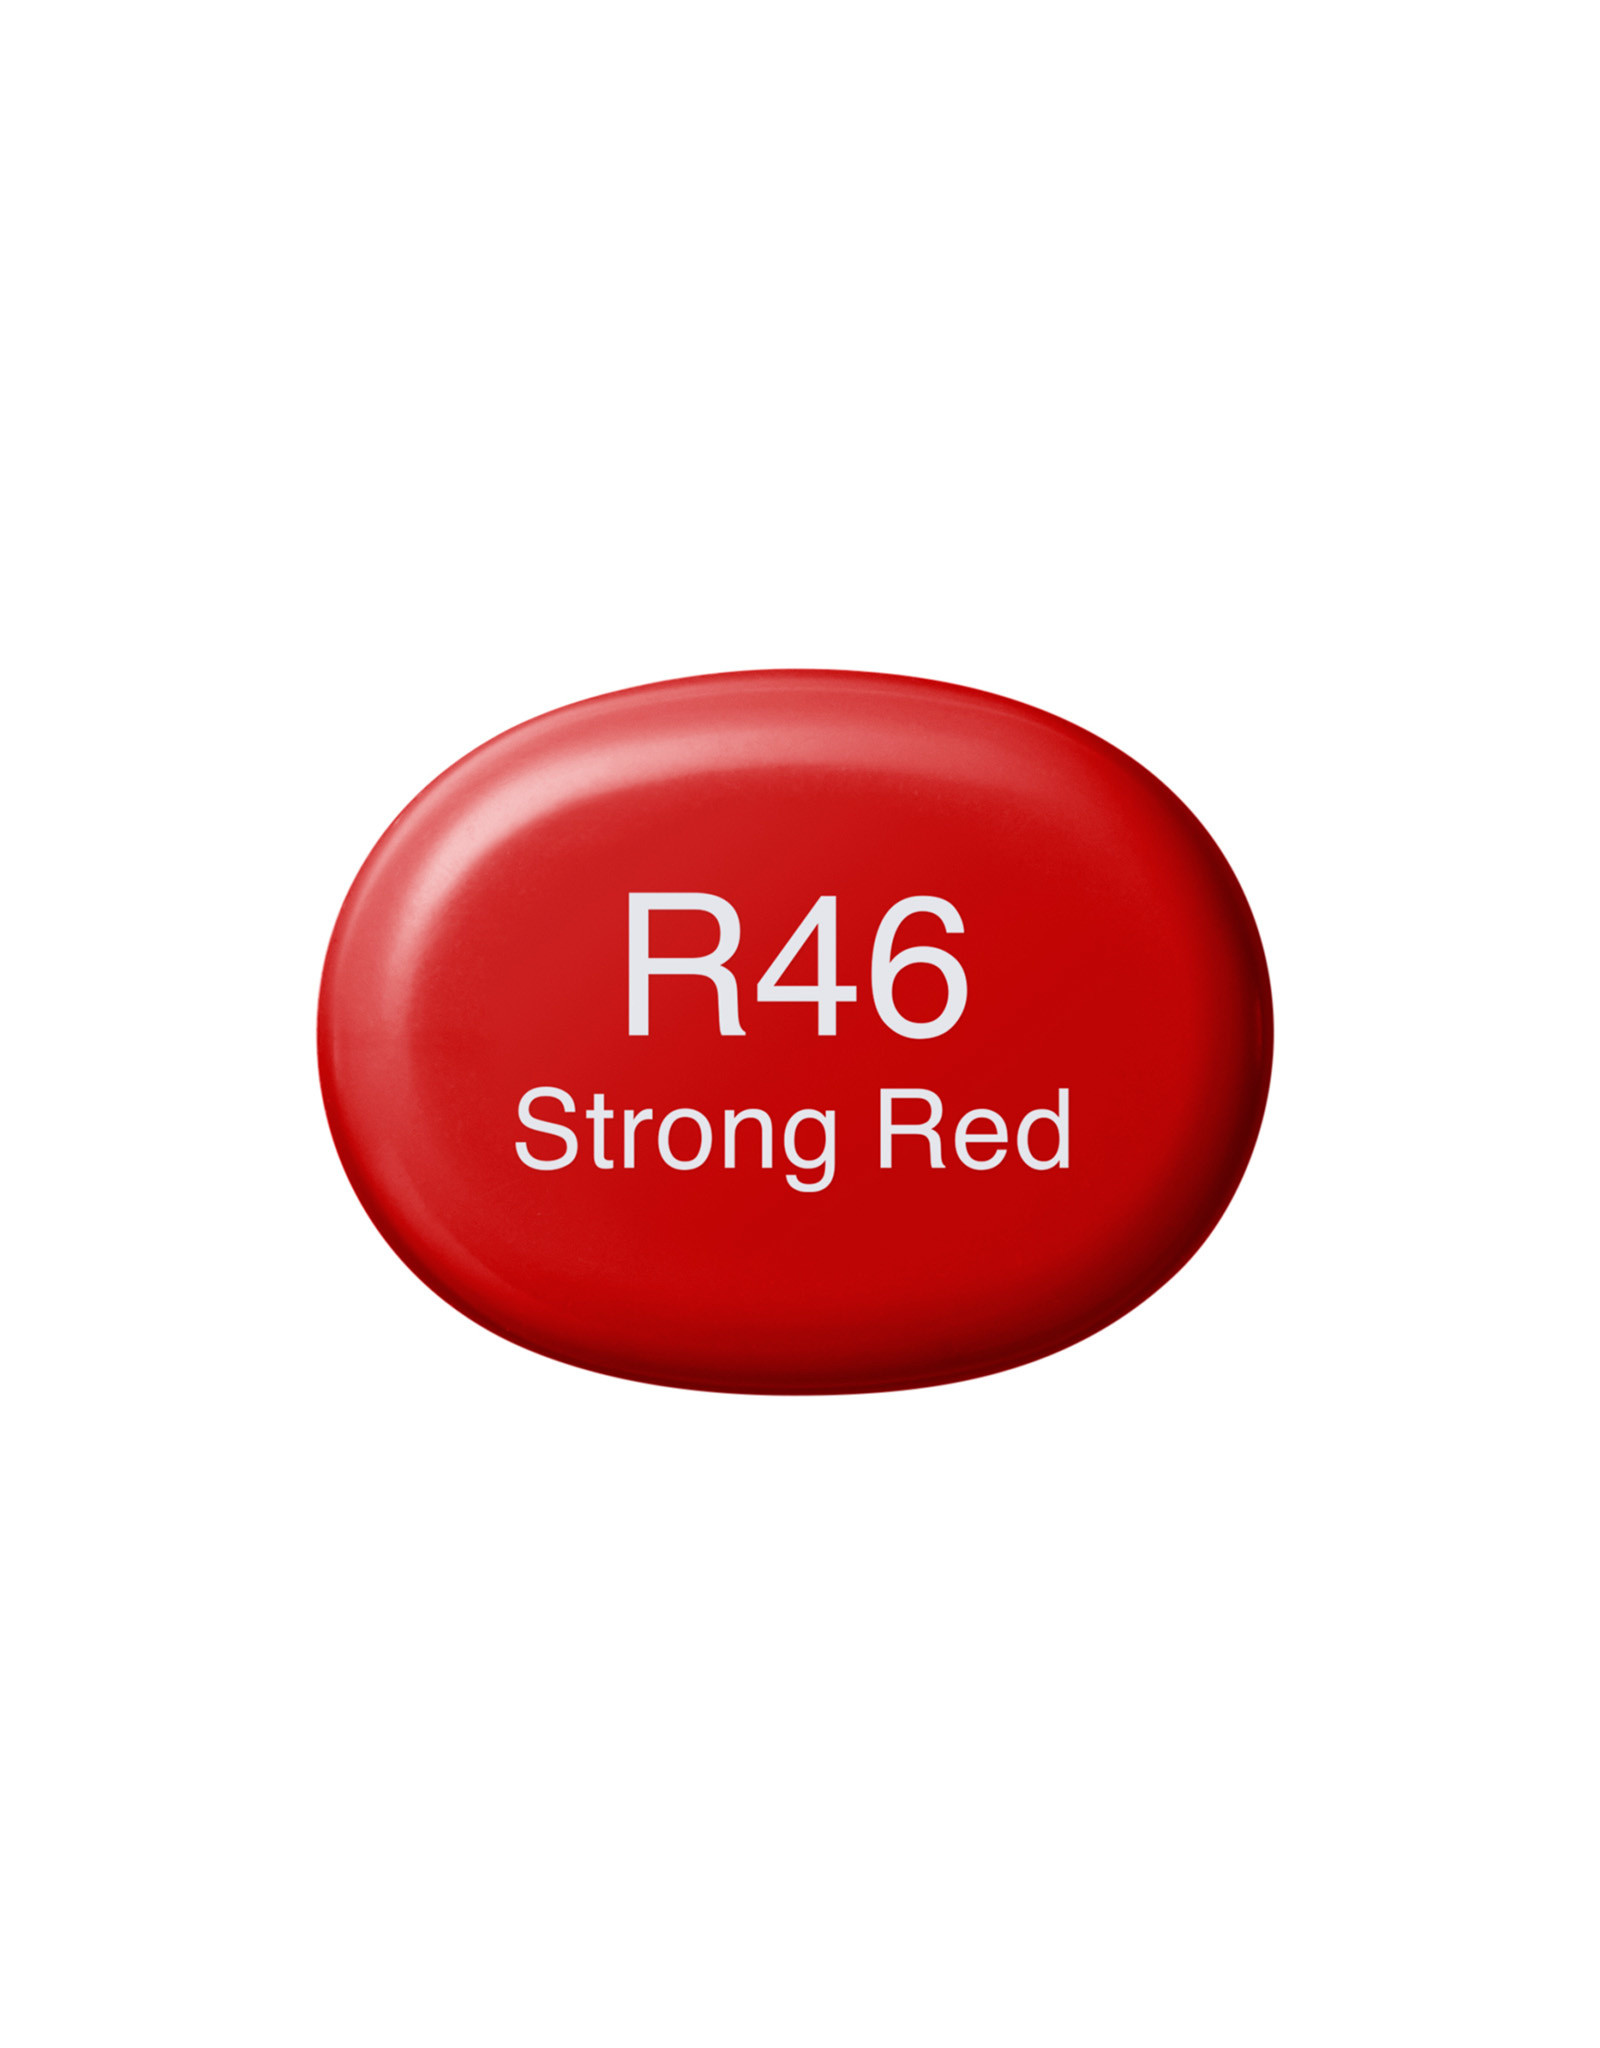 COPIC COPIC Sketch Marker R46 Strong Red